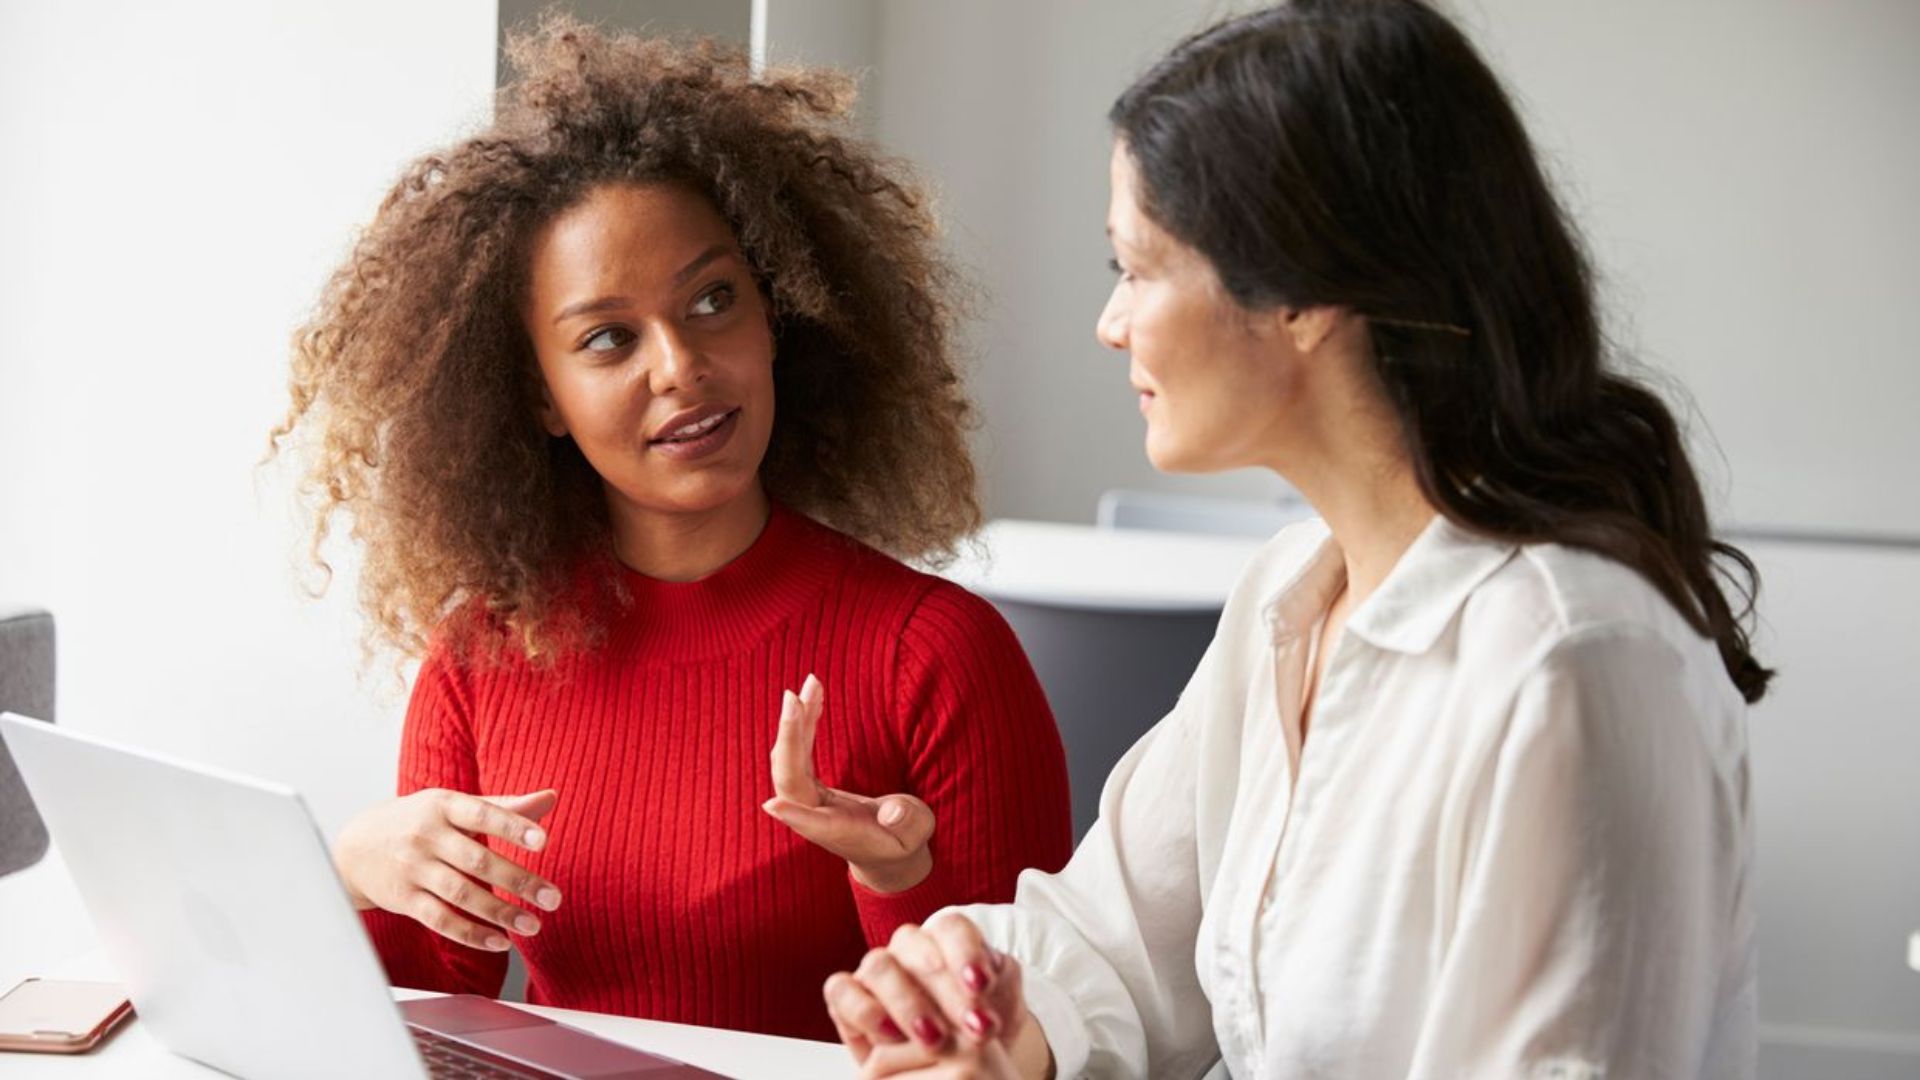 How do teachers mentor and support female students in pursuing leadership roles?